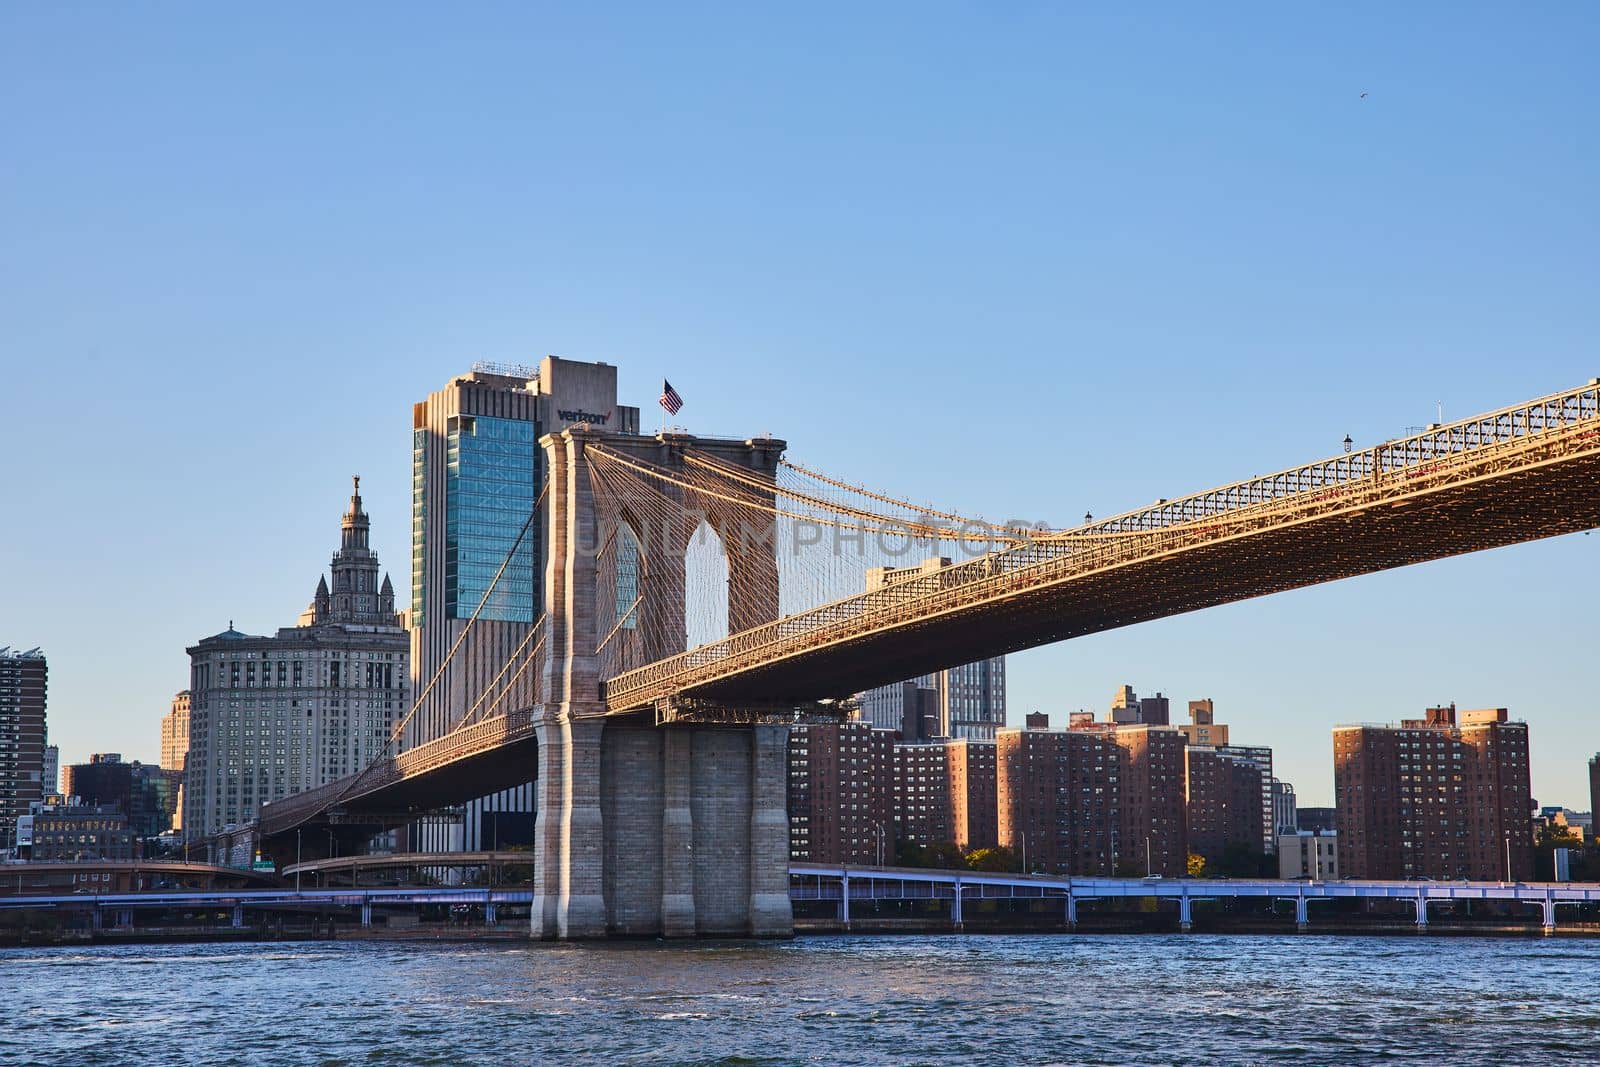 Image of Brooklyn Bridge in New York City with city skyline in background along river